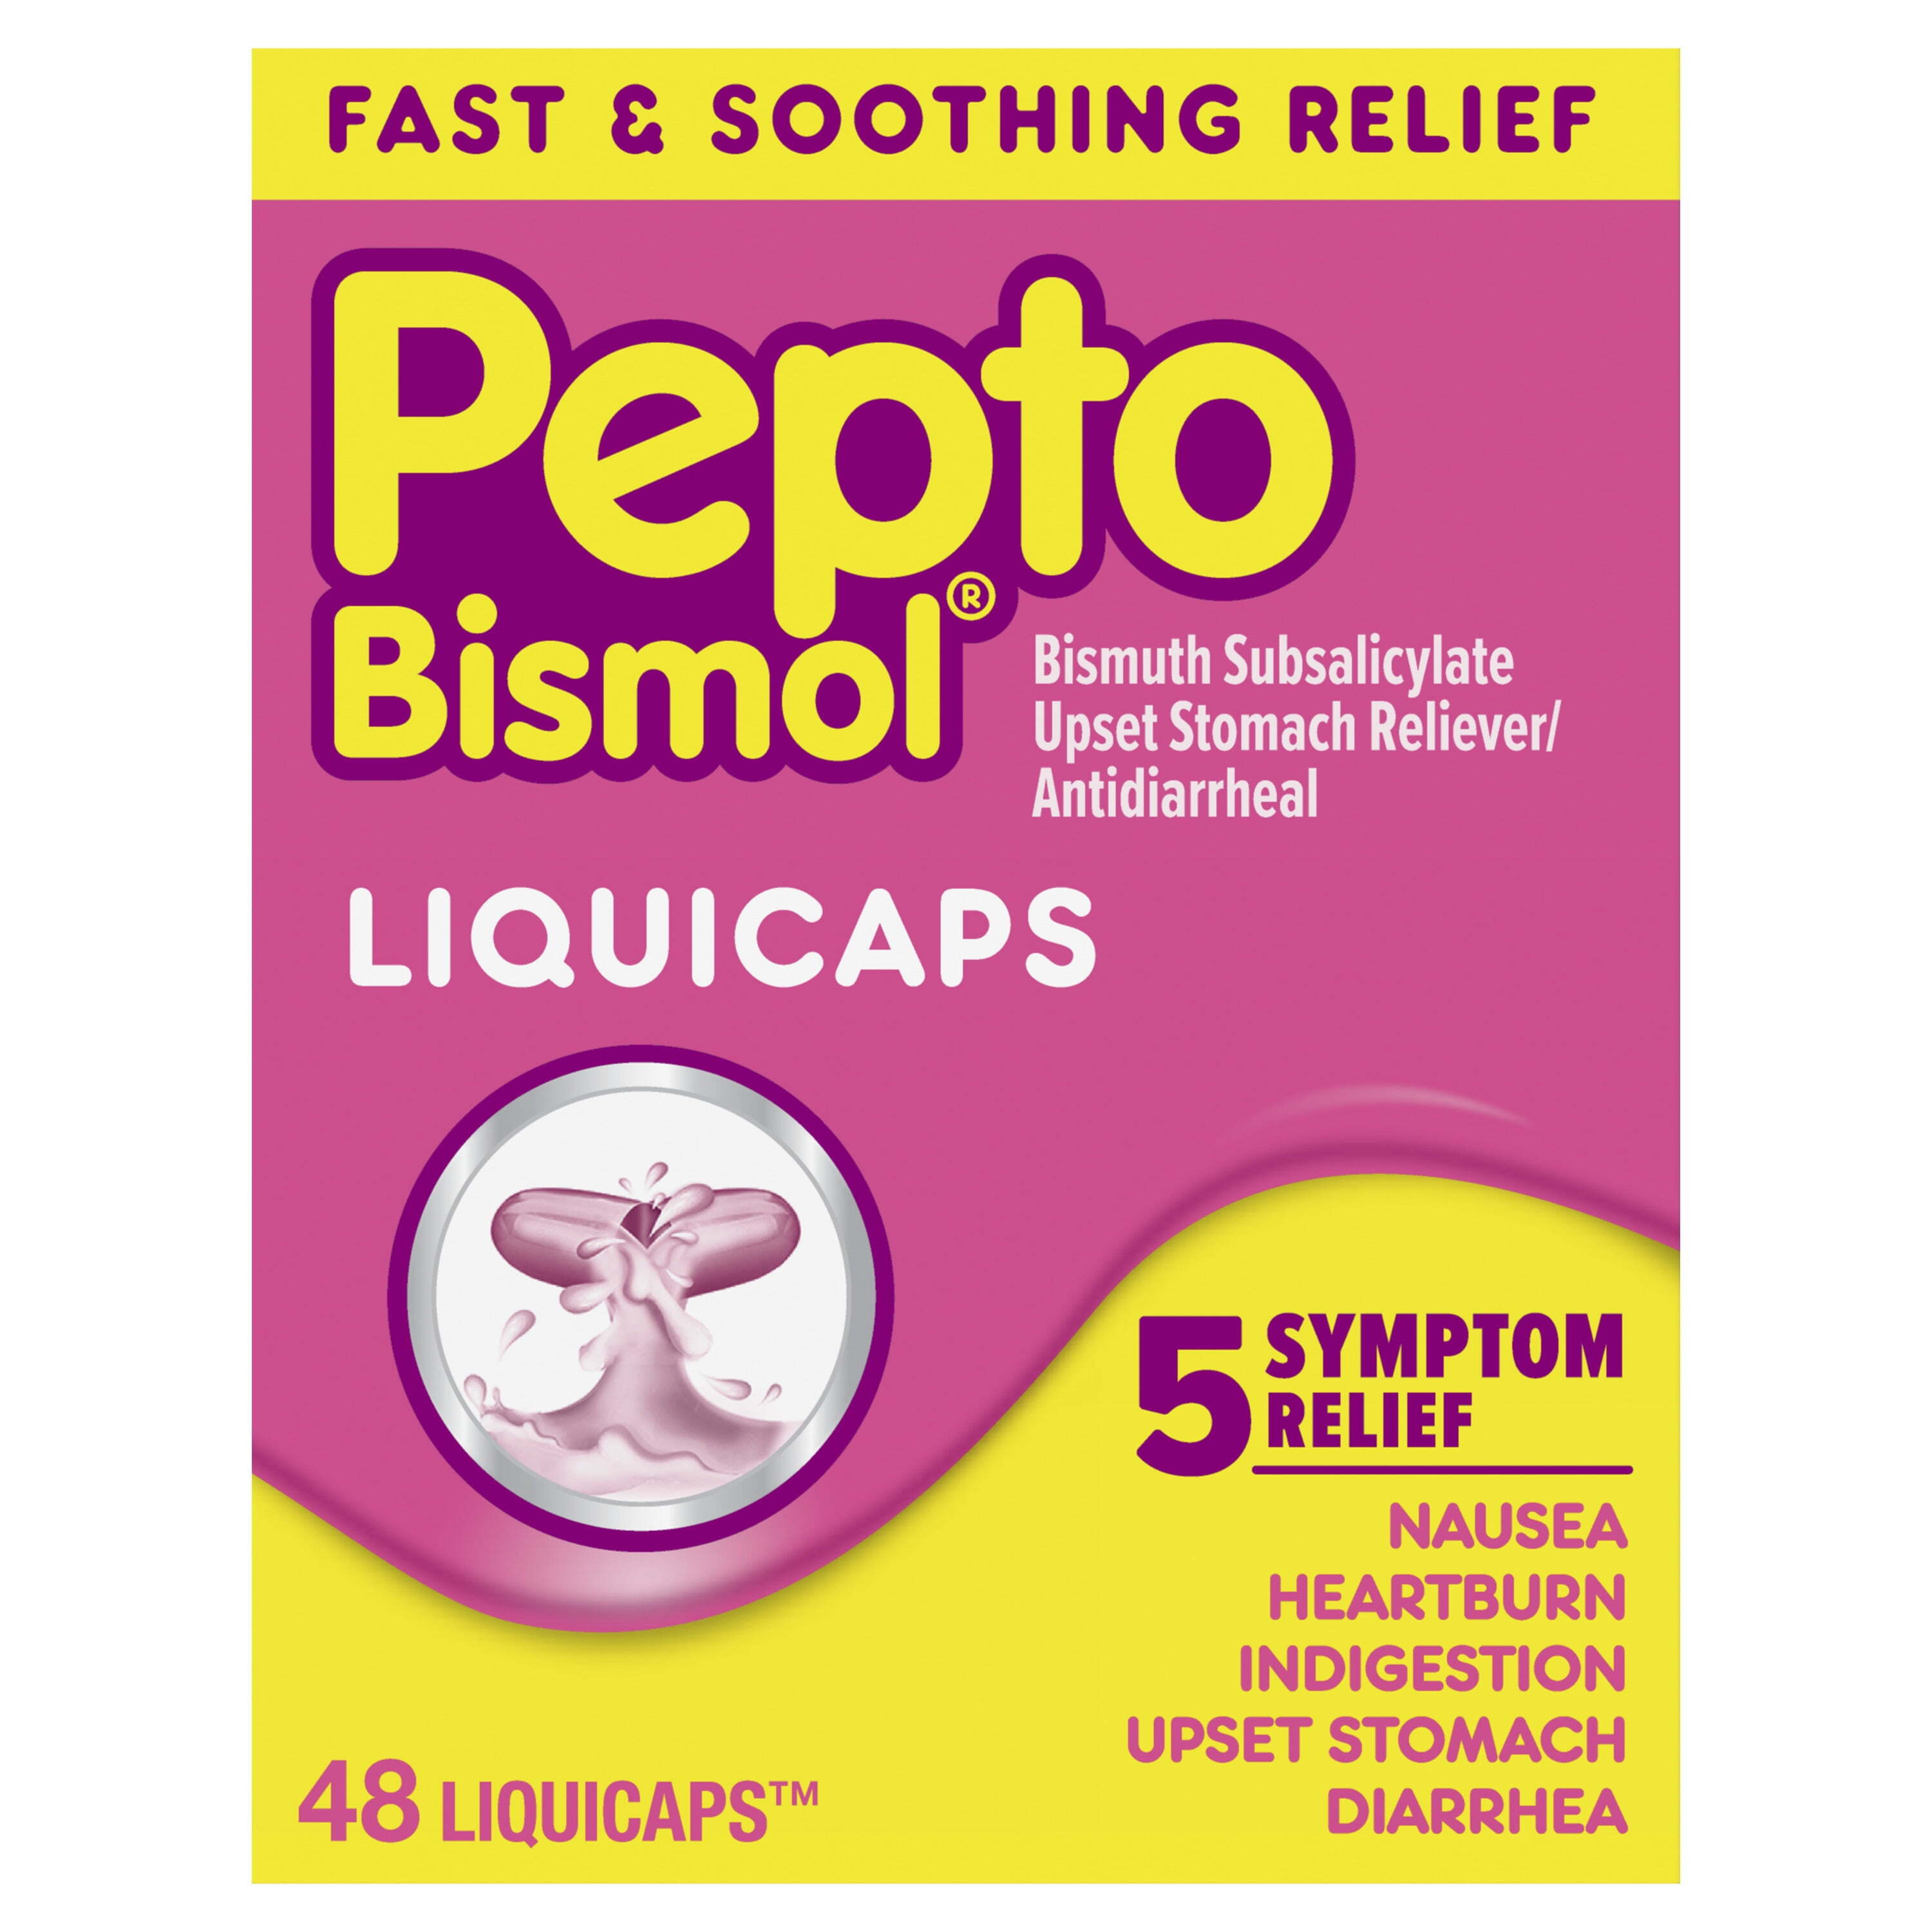 Pepto Bismol Liquicaps, Relief for Upset Stomach and Diarrhea, Over-the-Counter Medicine, 48 Ct - image 1 of 9